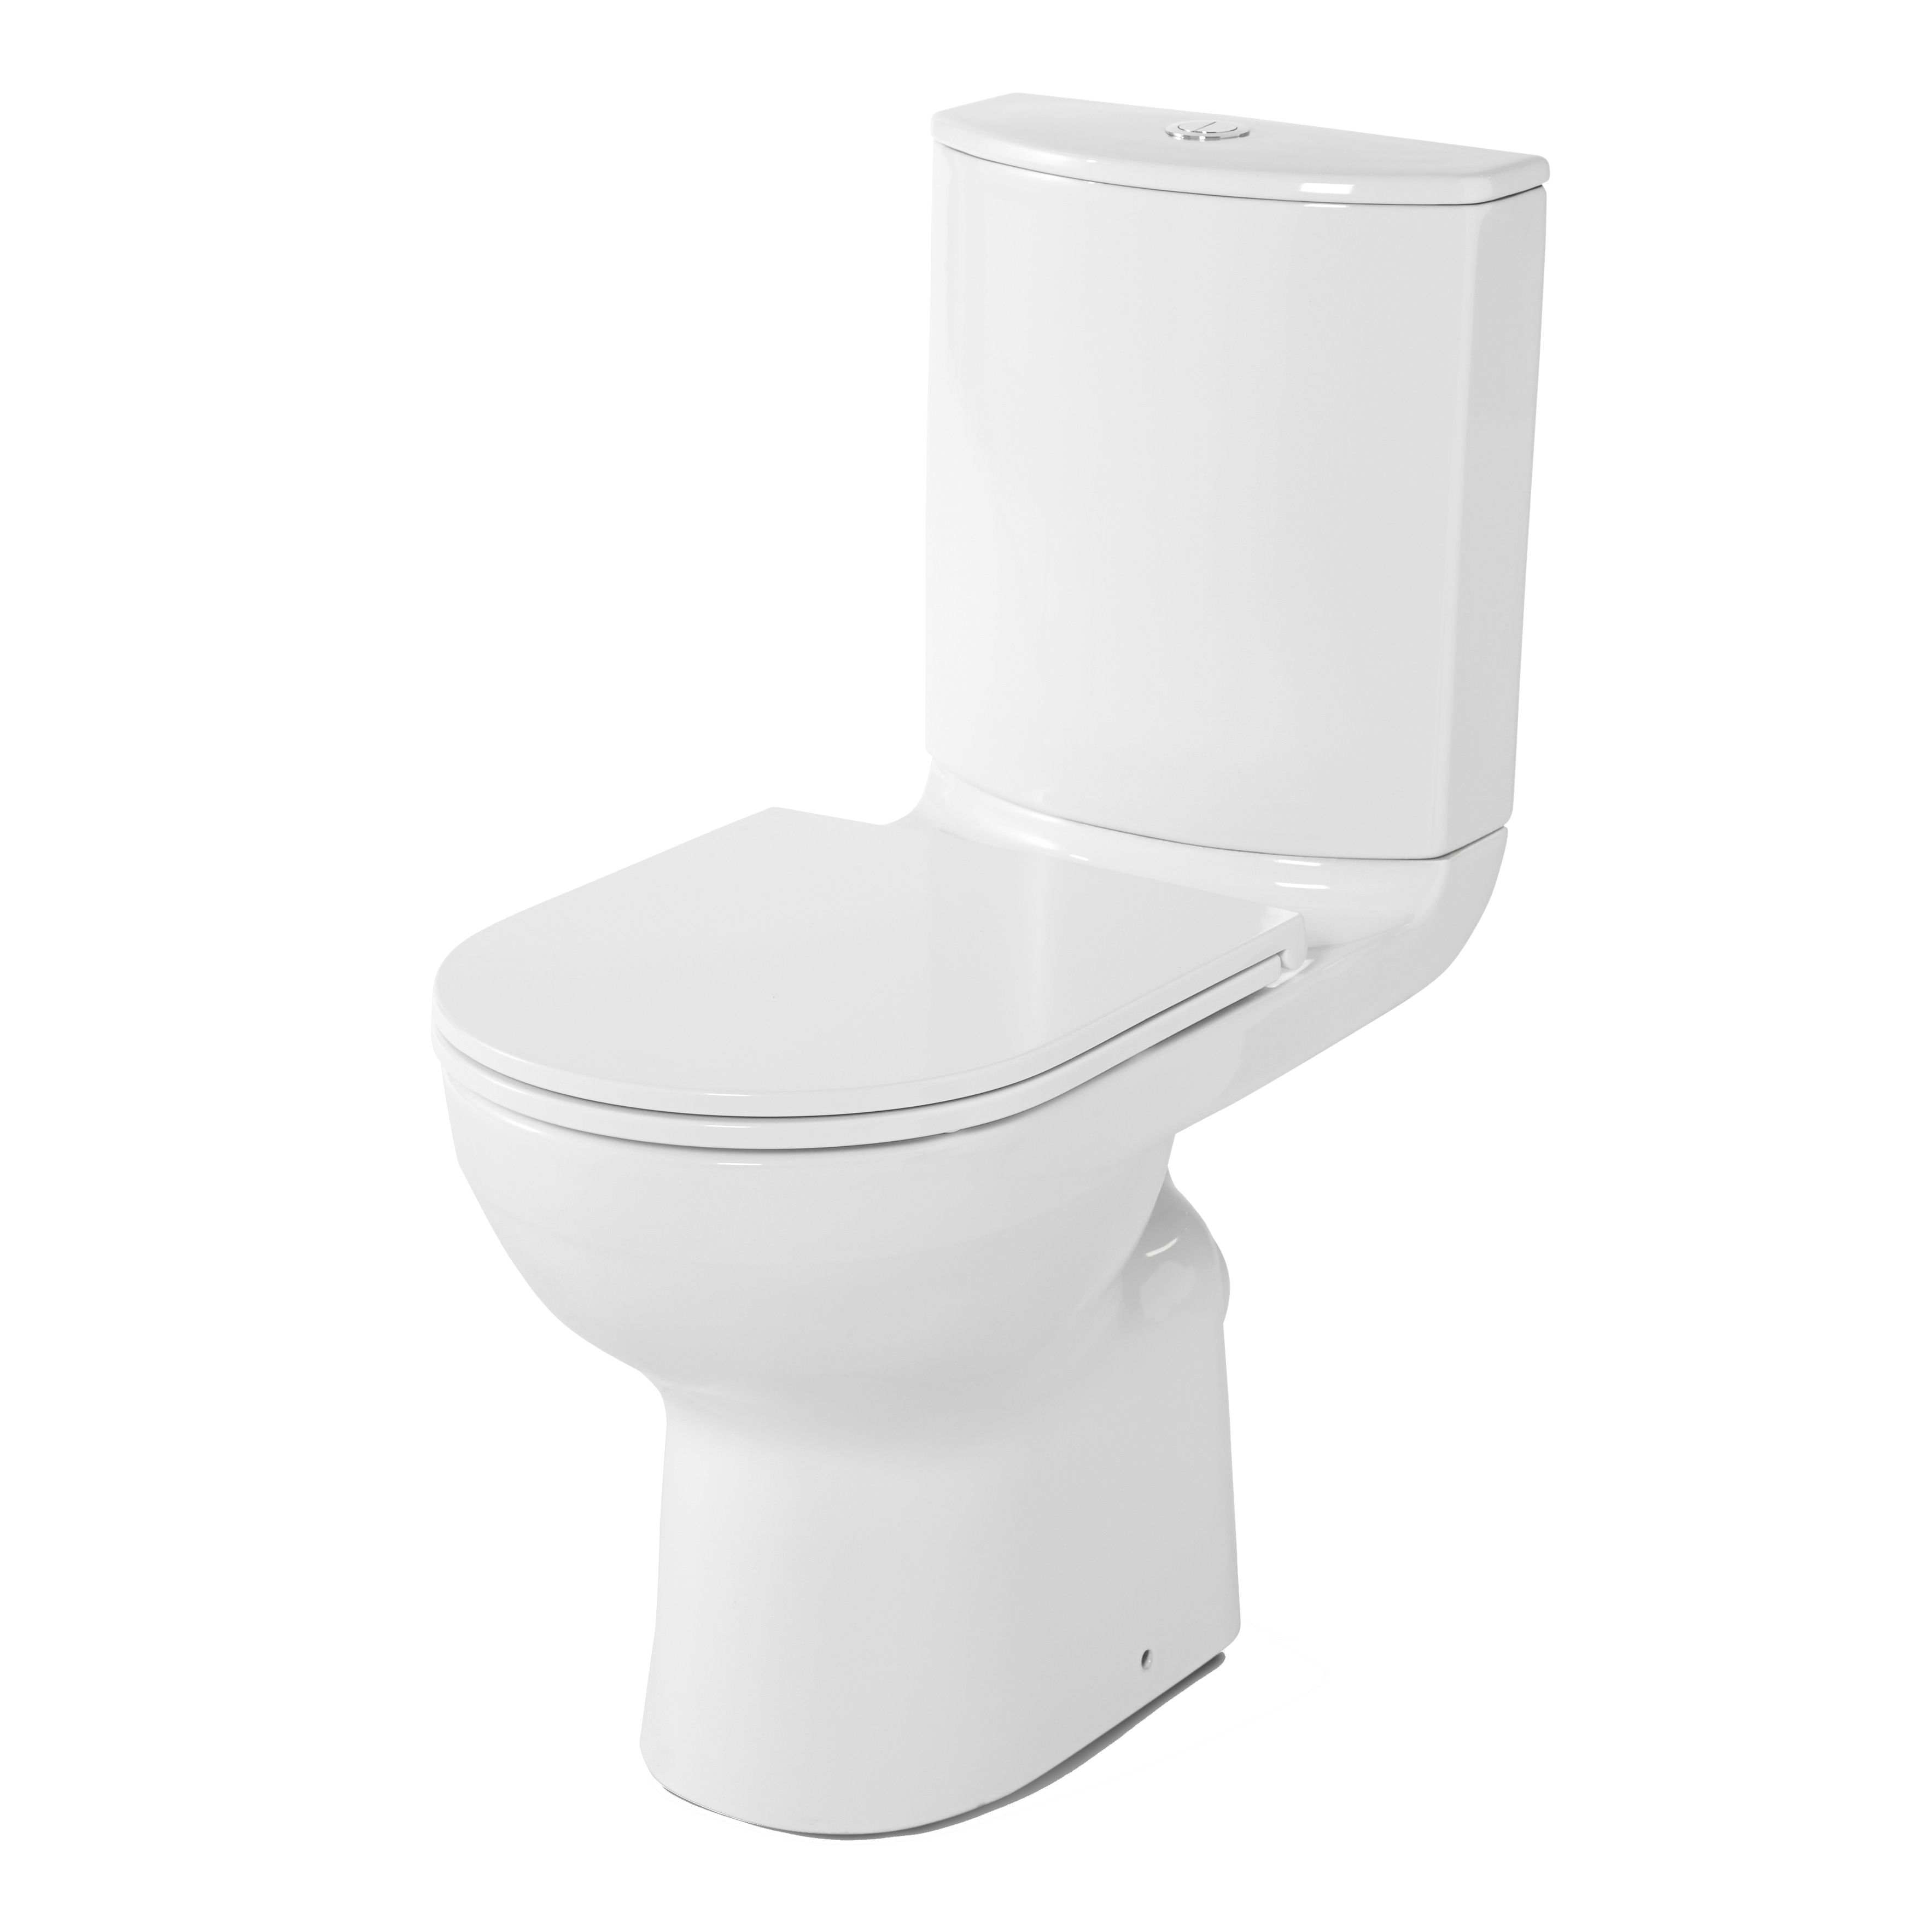 GoodHome Cavally comfort White Close-coupled Floor-mounted Toilet & full pedestal basin (W)370mm (H)880mm